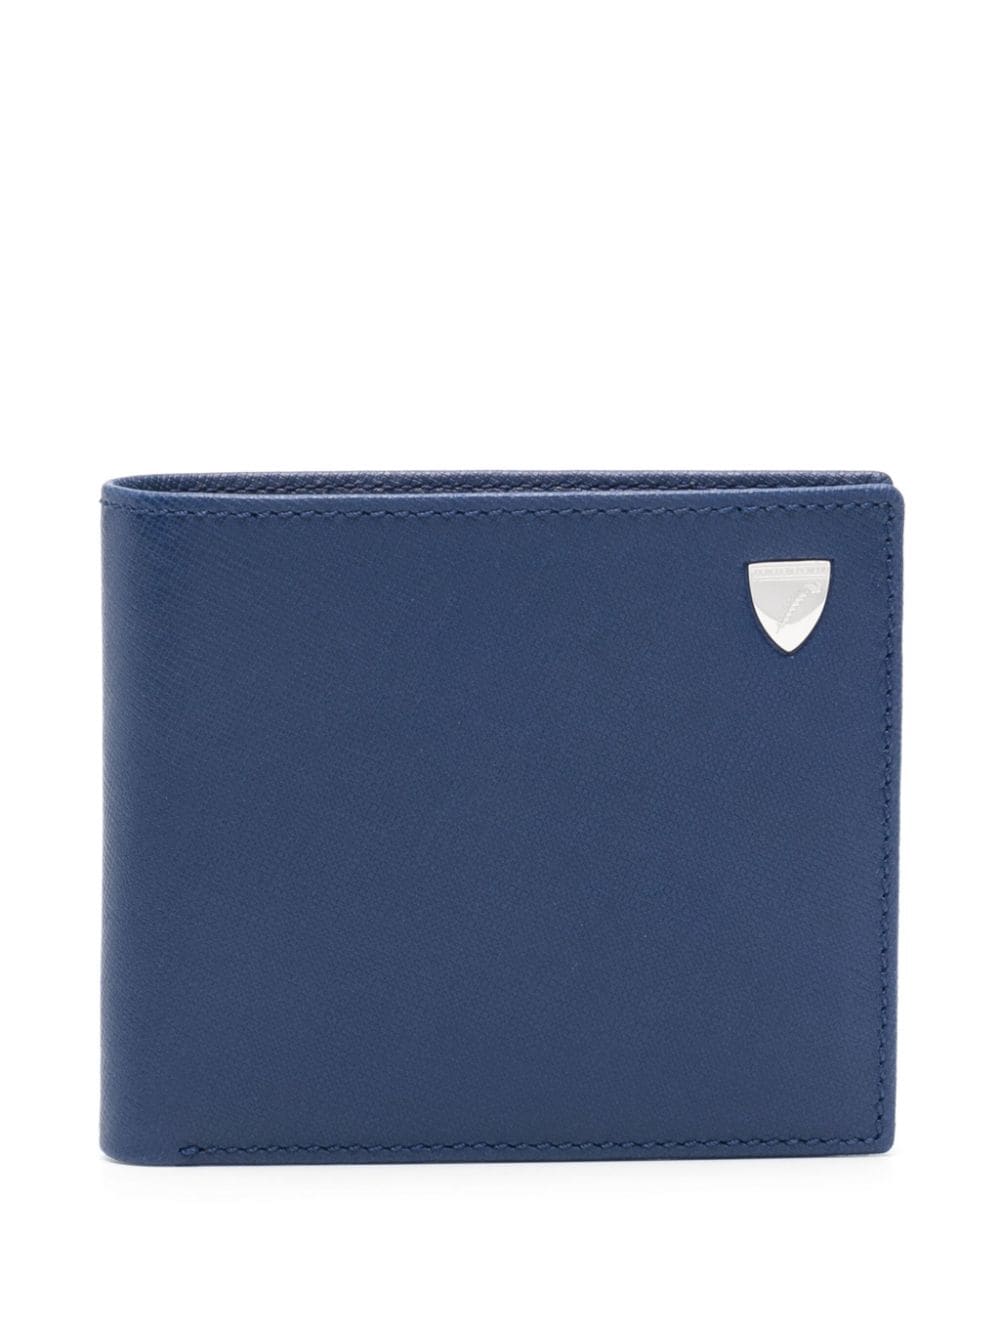 Aspinal Of London Billfold leather wallet - Blue von Aspinal Of London